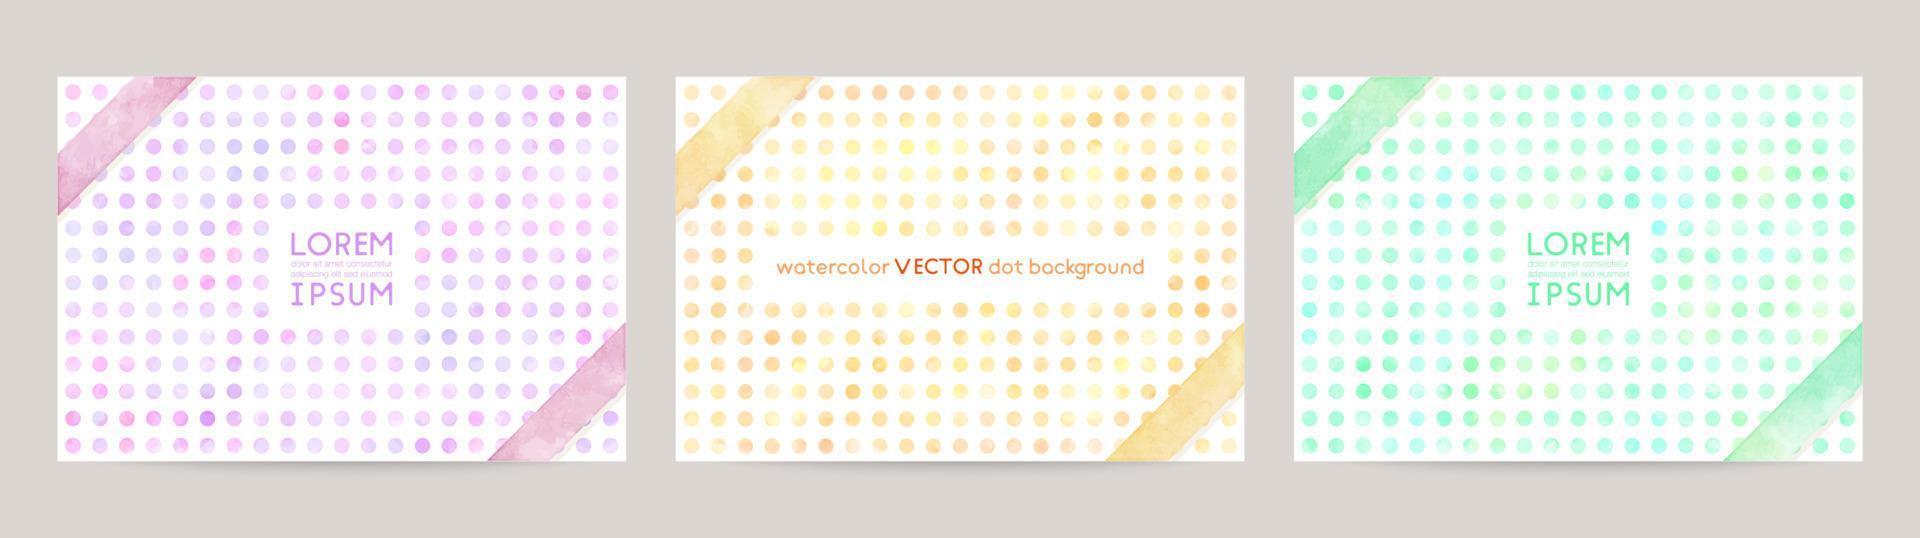 Set of colorful vector watercolor backgrounds with white space for text. Set of cards for wedding, greetings, birthday. backgrounds for web banners design. purple, orange, green